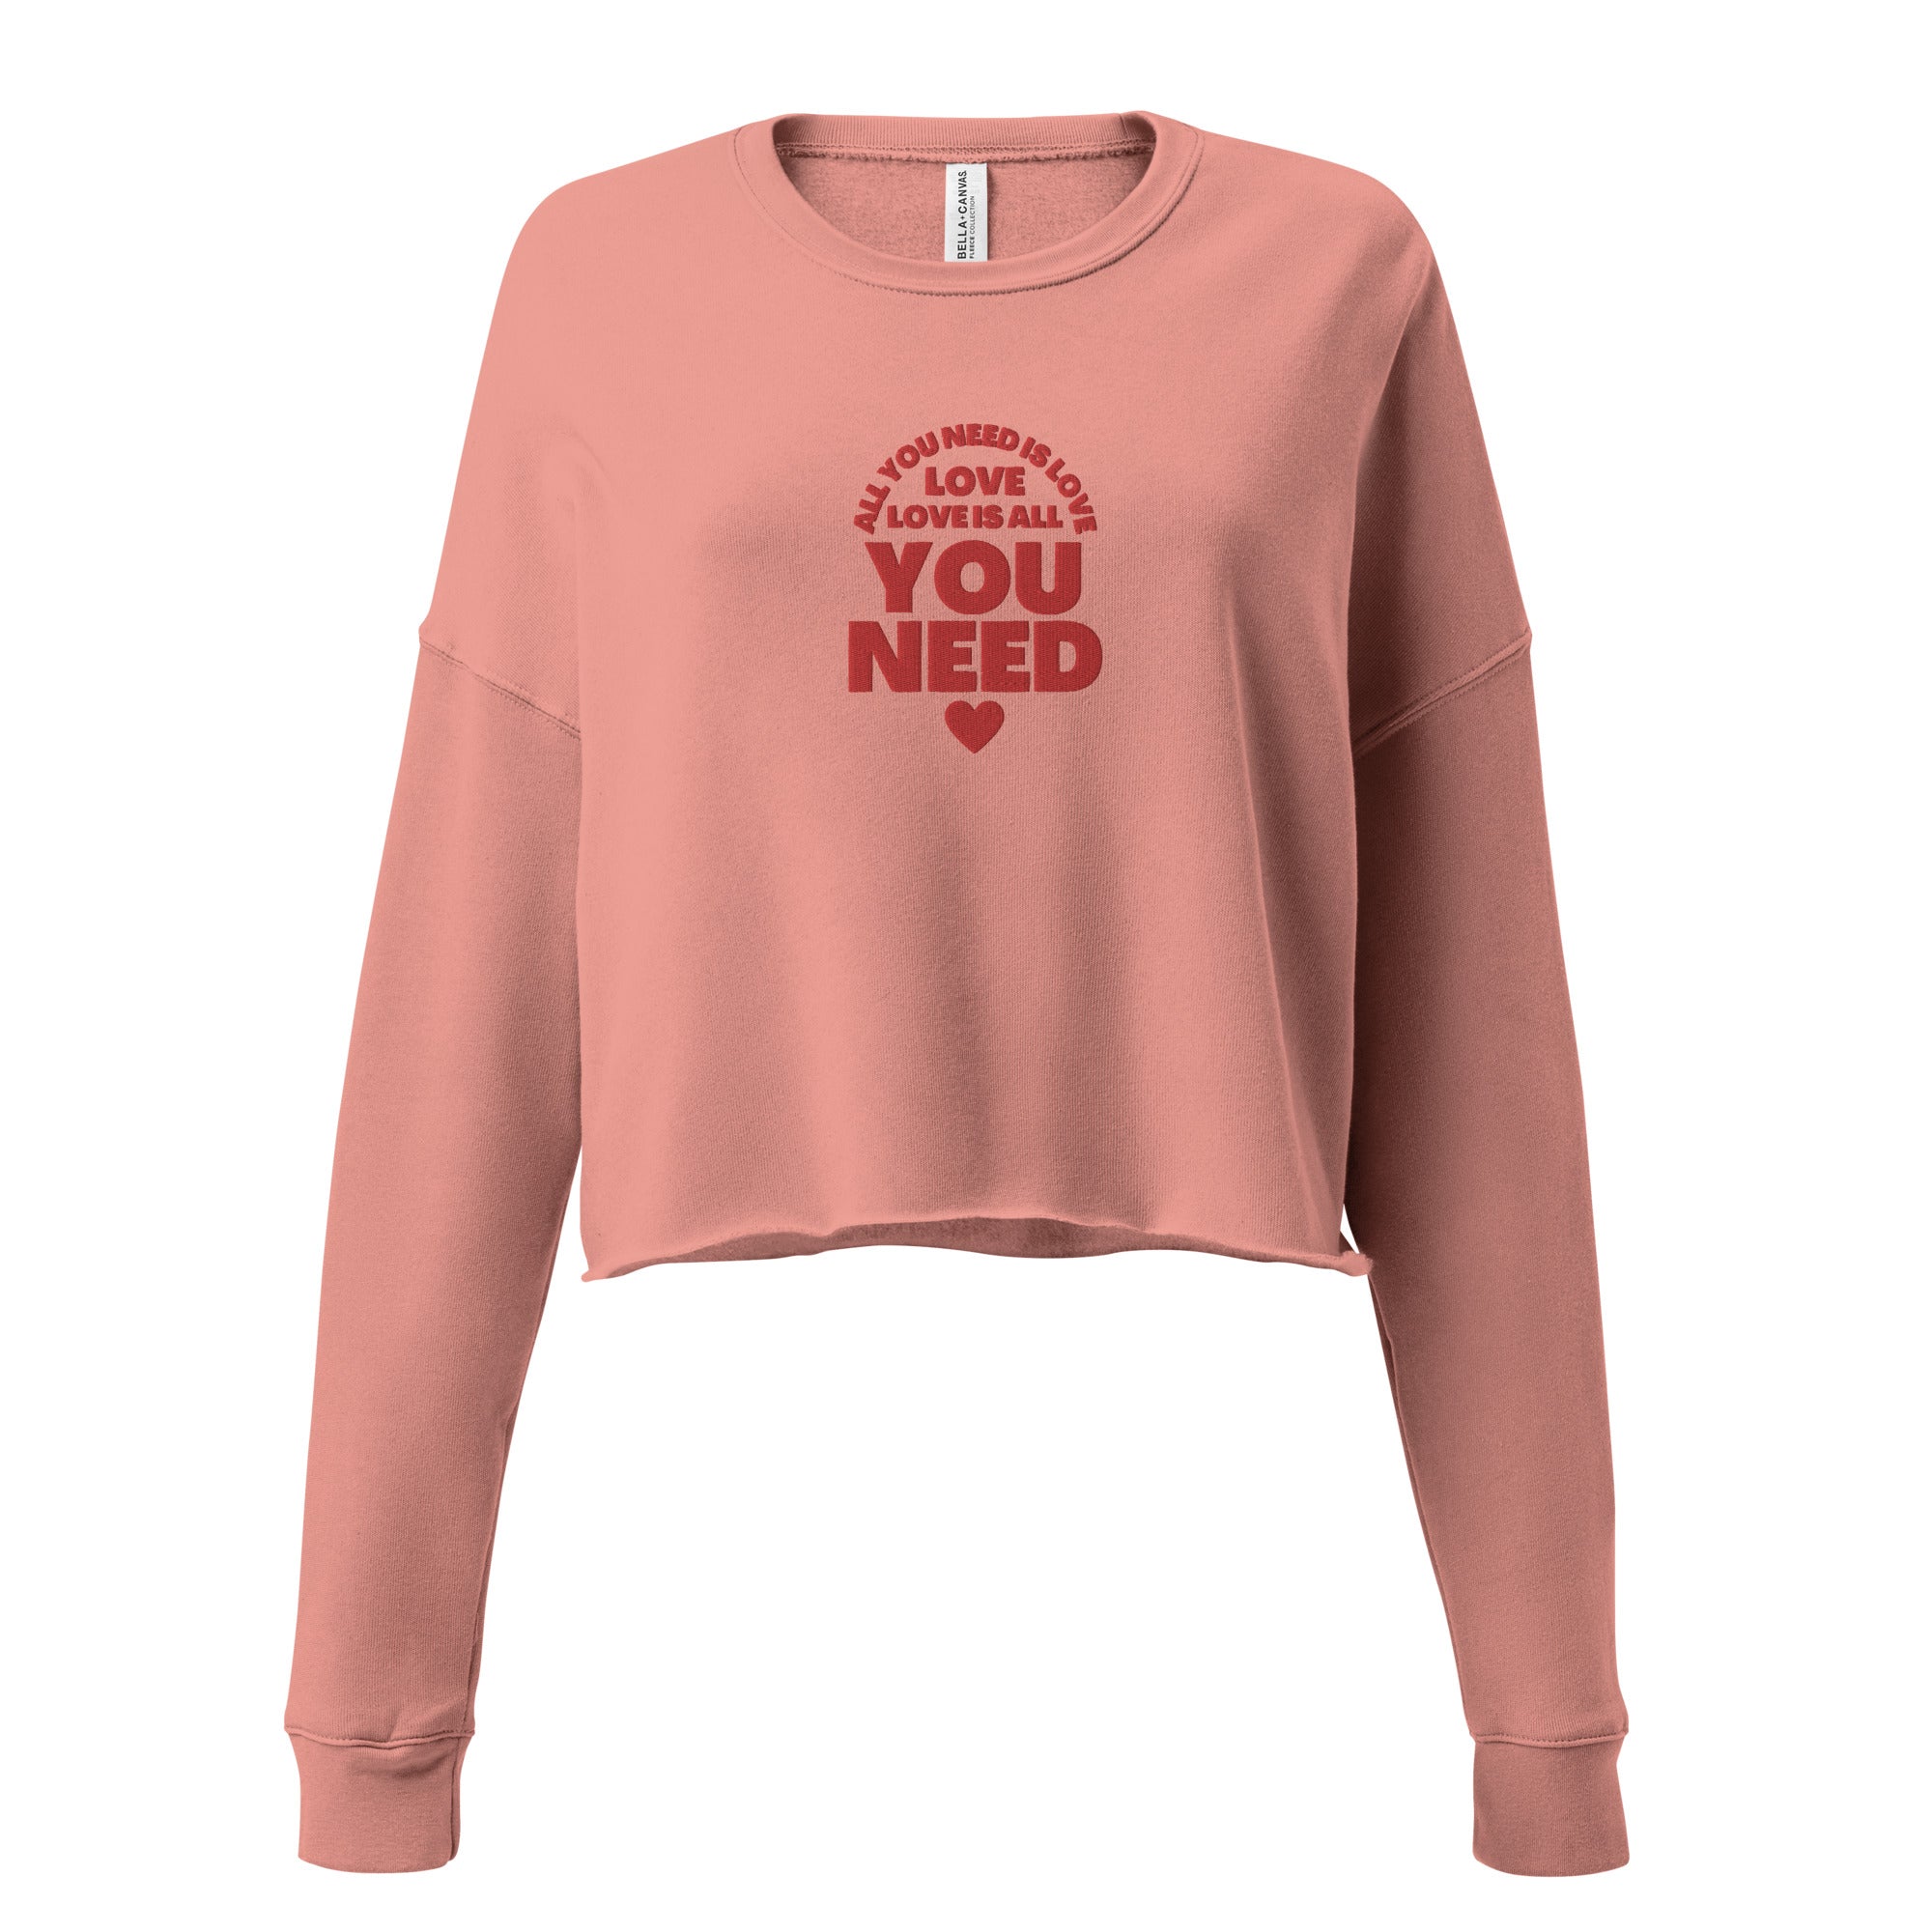 All You Need Is Love Premium Embroidered Women's Crop Sweatshirt - Inspired by The Beatles